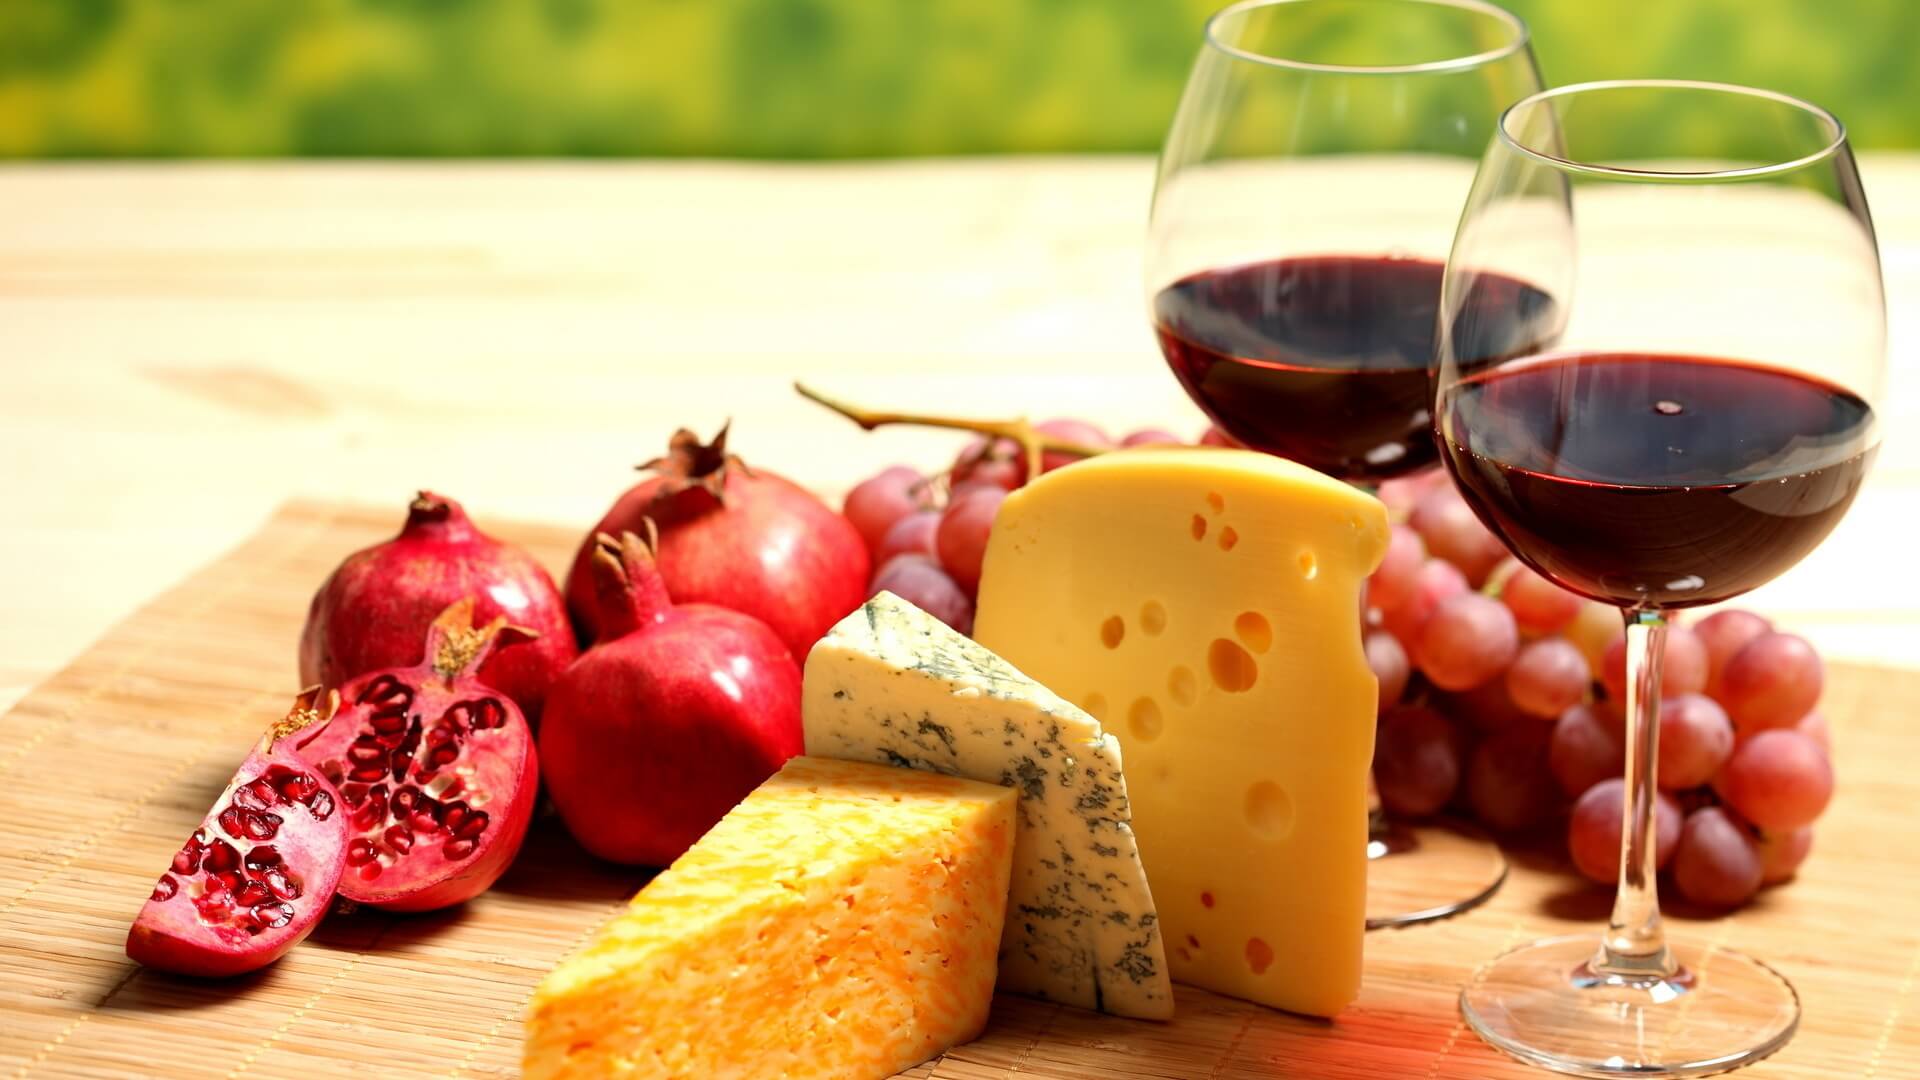 WINE AND CHEESE